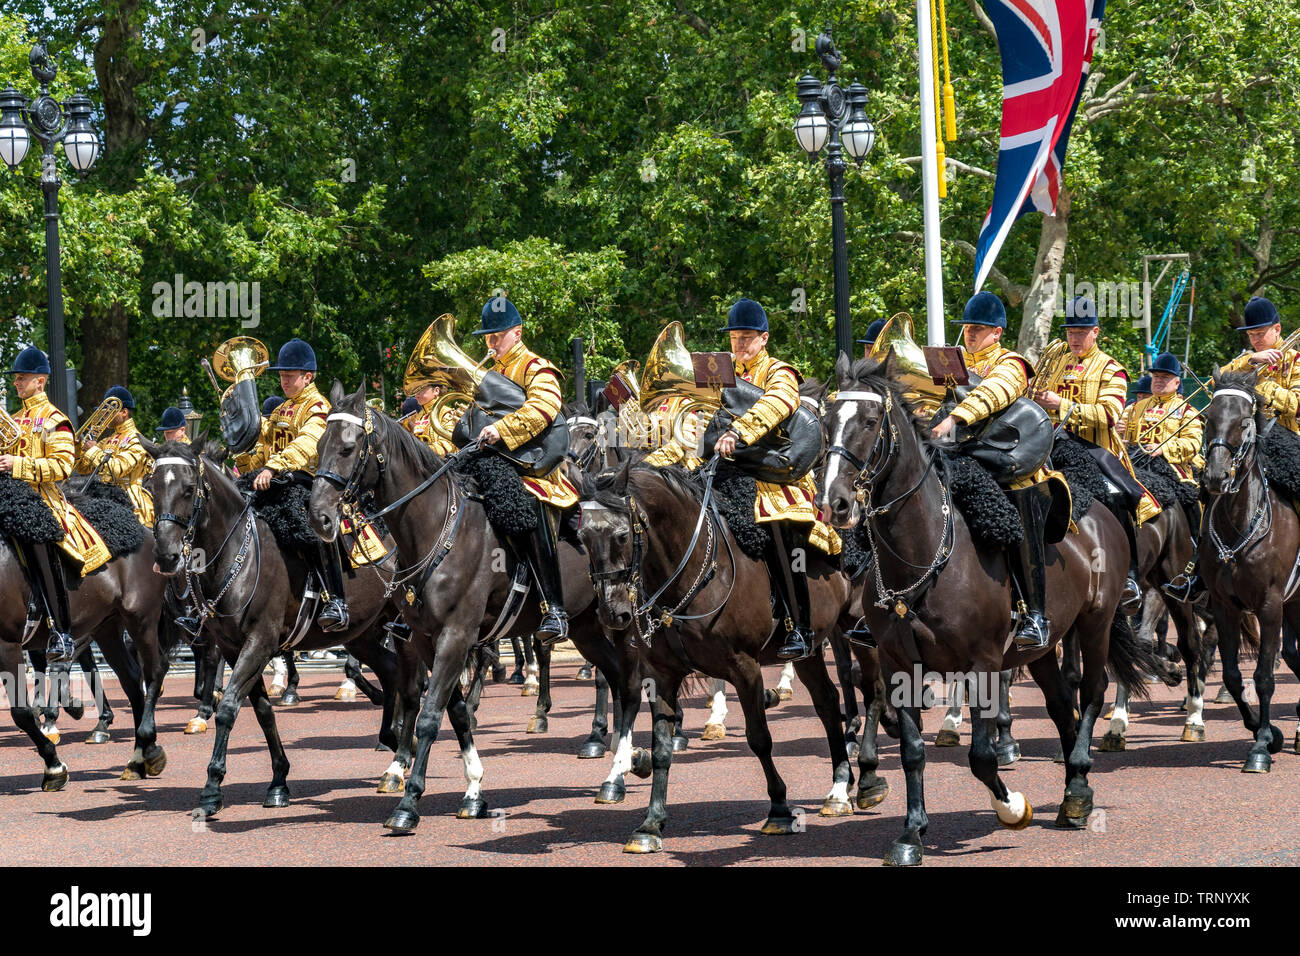 The Mounted Band of the Household Cavalry on the Mall at the Trooping The Color Ceremony, Londres, Royaume-Uni, 2019 Banque D'Images